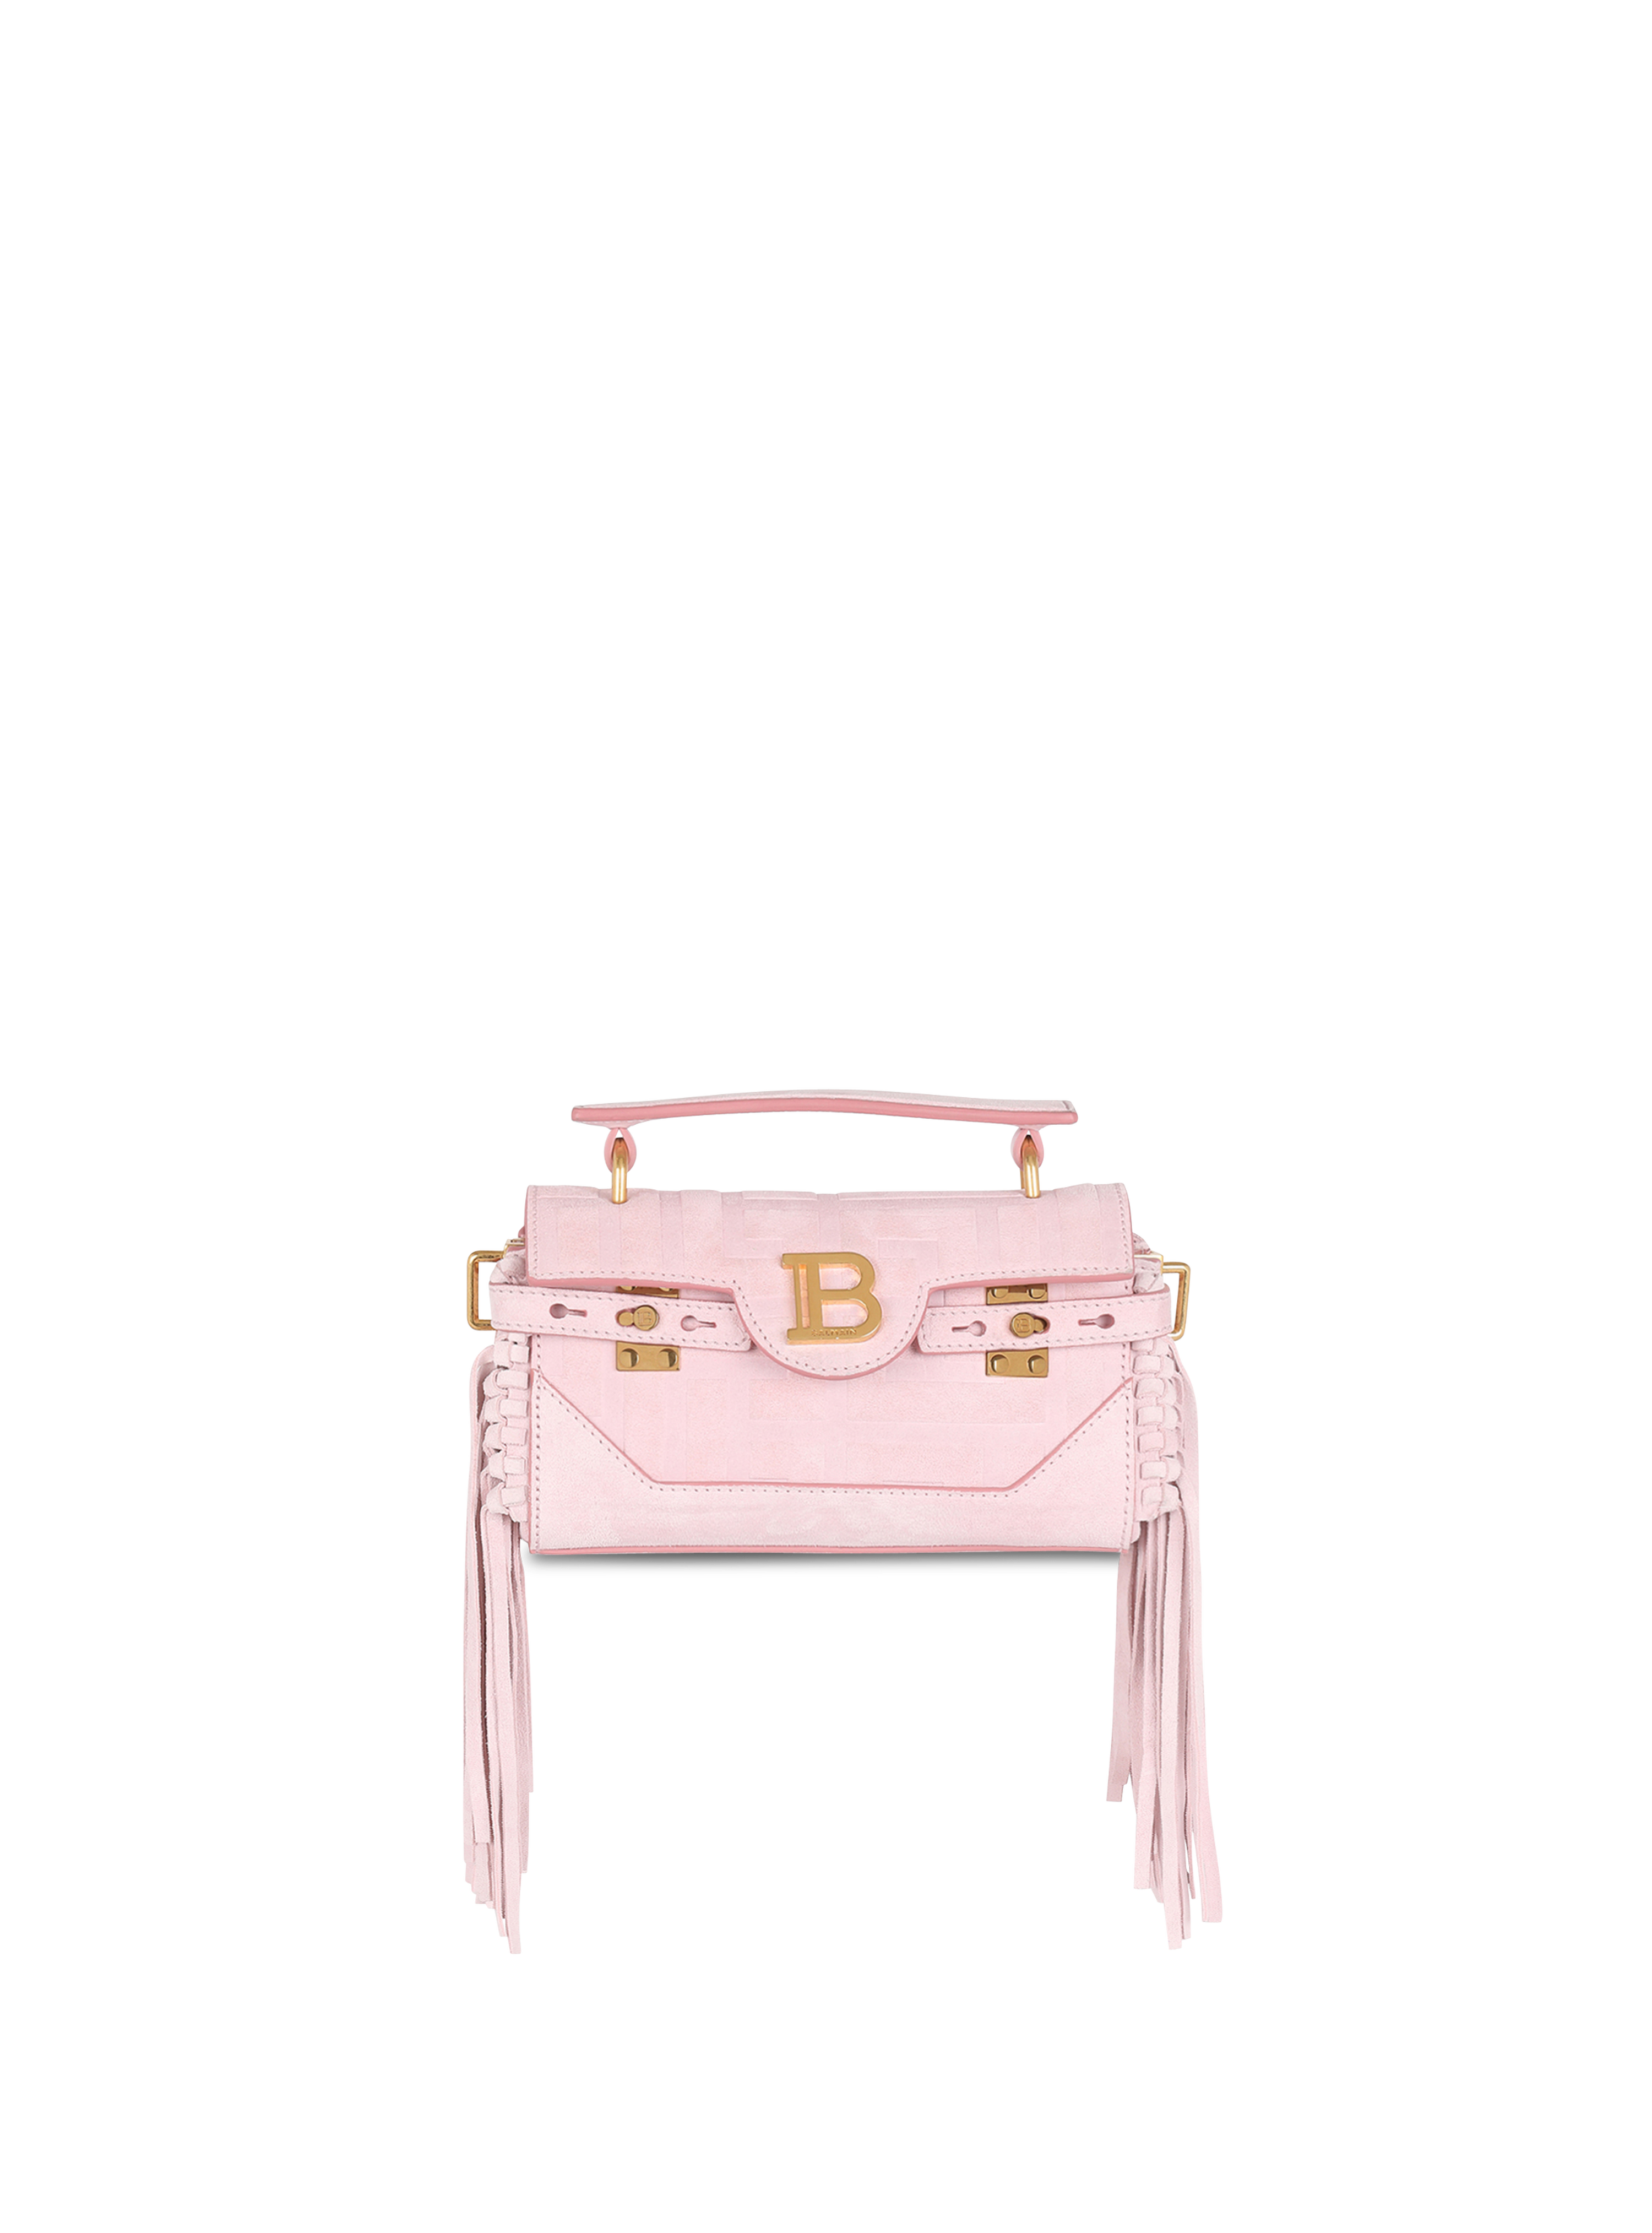 Suede B-Buzz 19 bag with fringe, pink